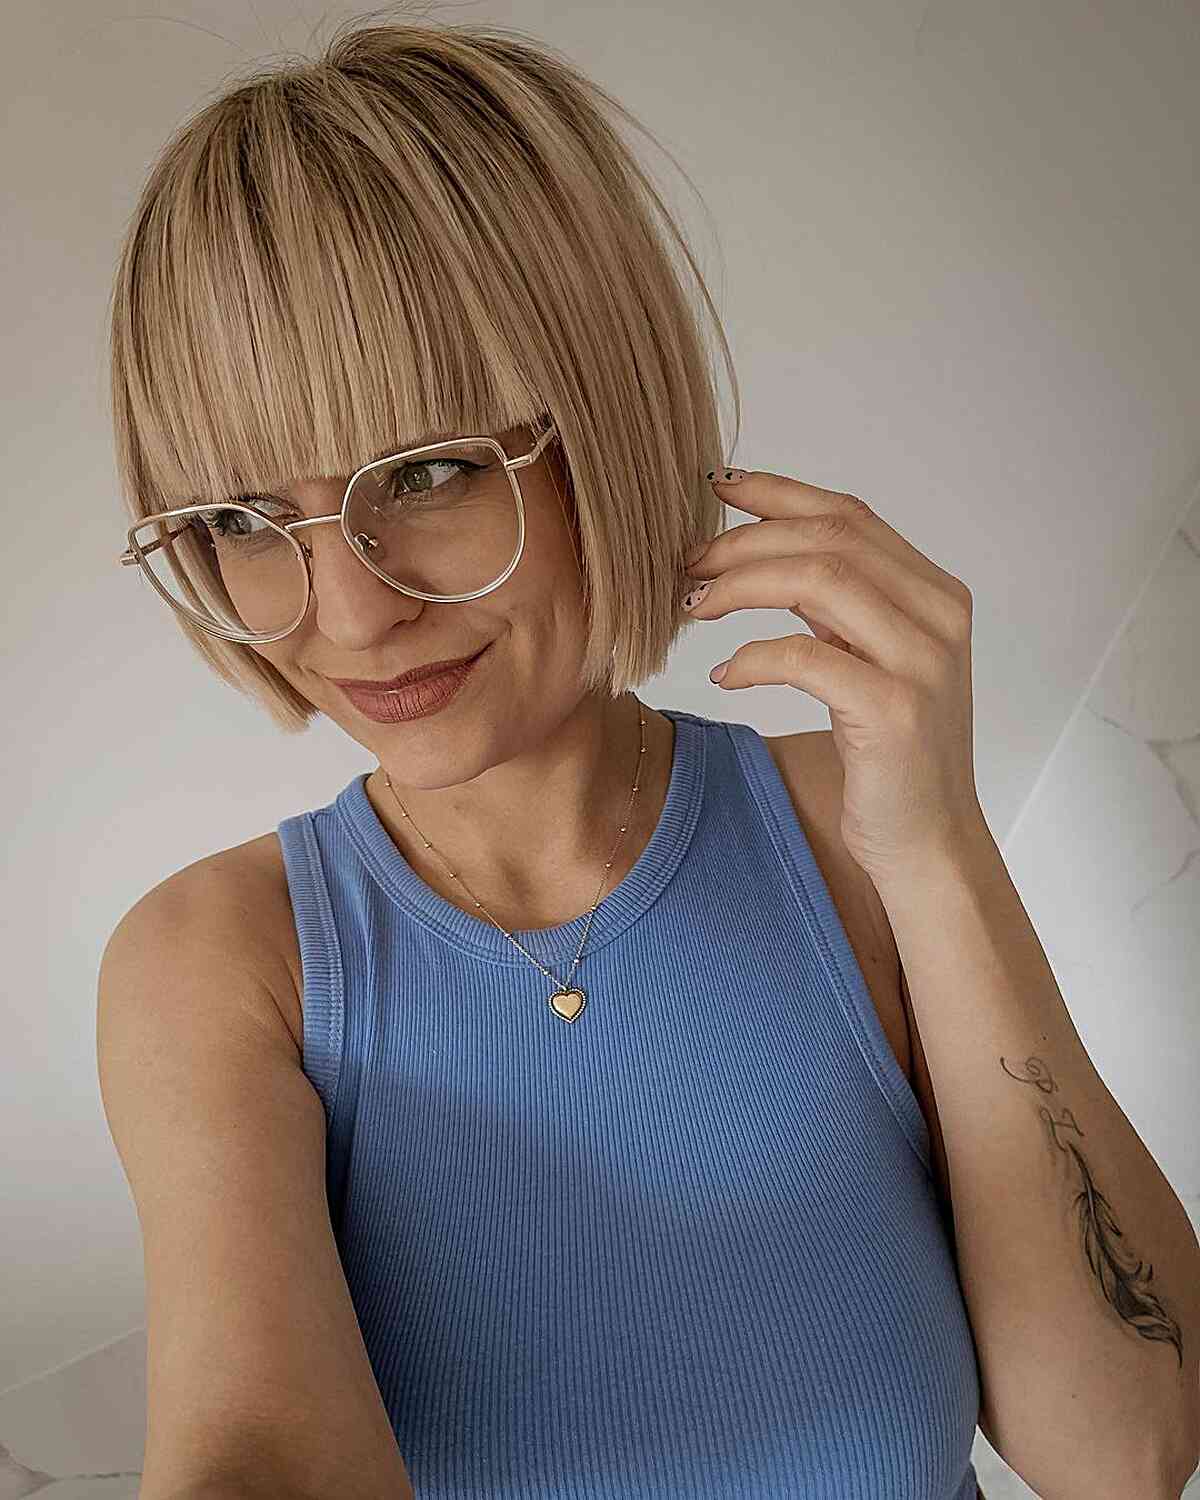 Blunt Cut Bob with Blunt Cut Bangs for short dark blondes with glasses